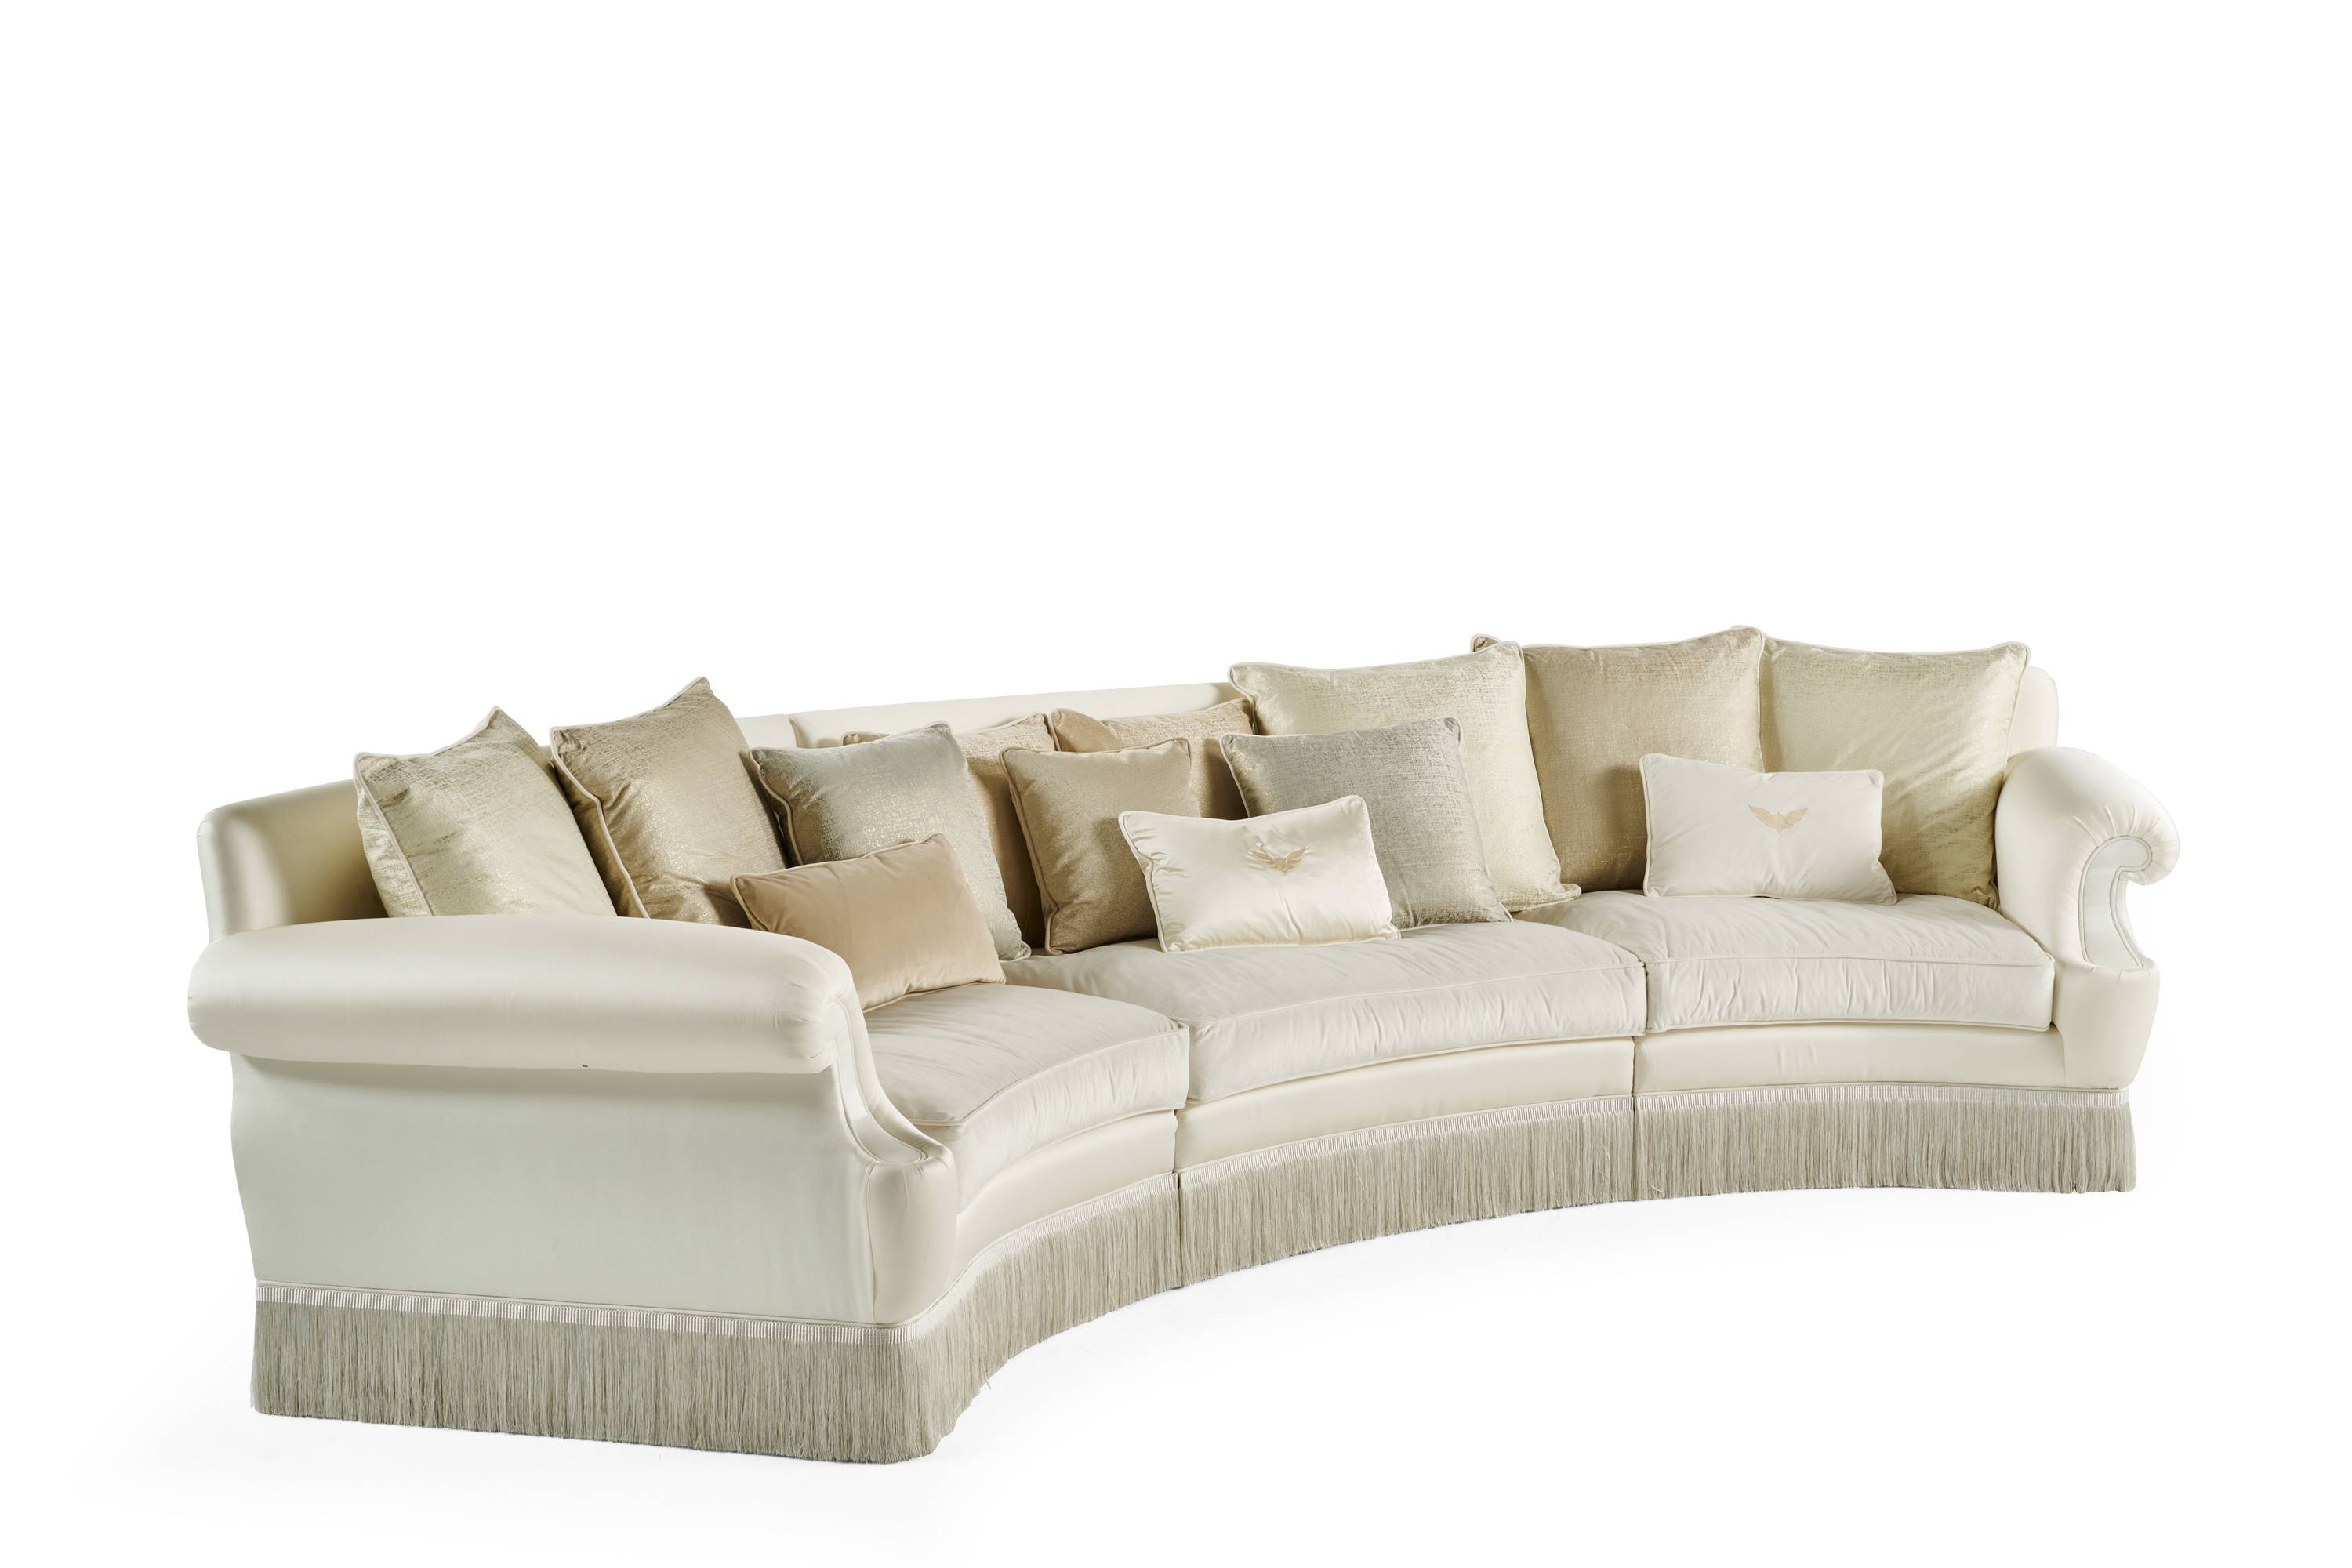 PLAZA 2-seater sofa - 3-seater sofa - armchair - sofa - A luxury experience with the Héritage collection and its classic luxurious furniture